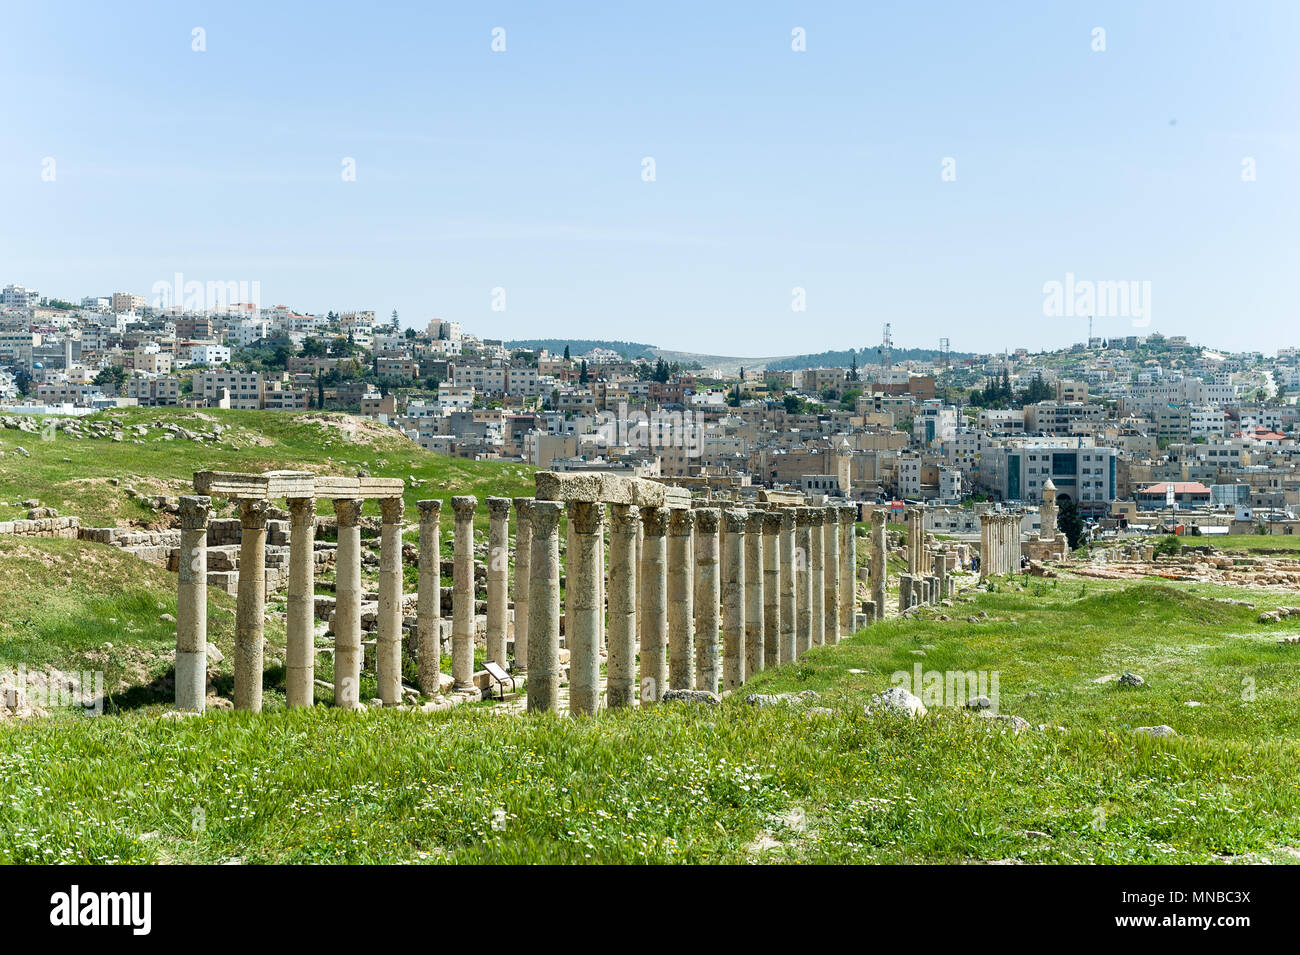 Jerash is the site of the ruins of the Greco-Roman city of Gerasa, also referred to as Antioch on the Golden River. Stock Photo